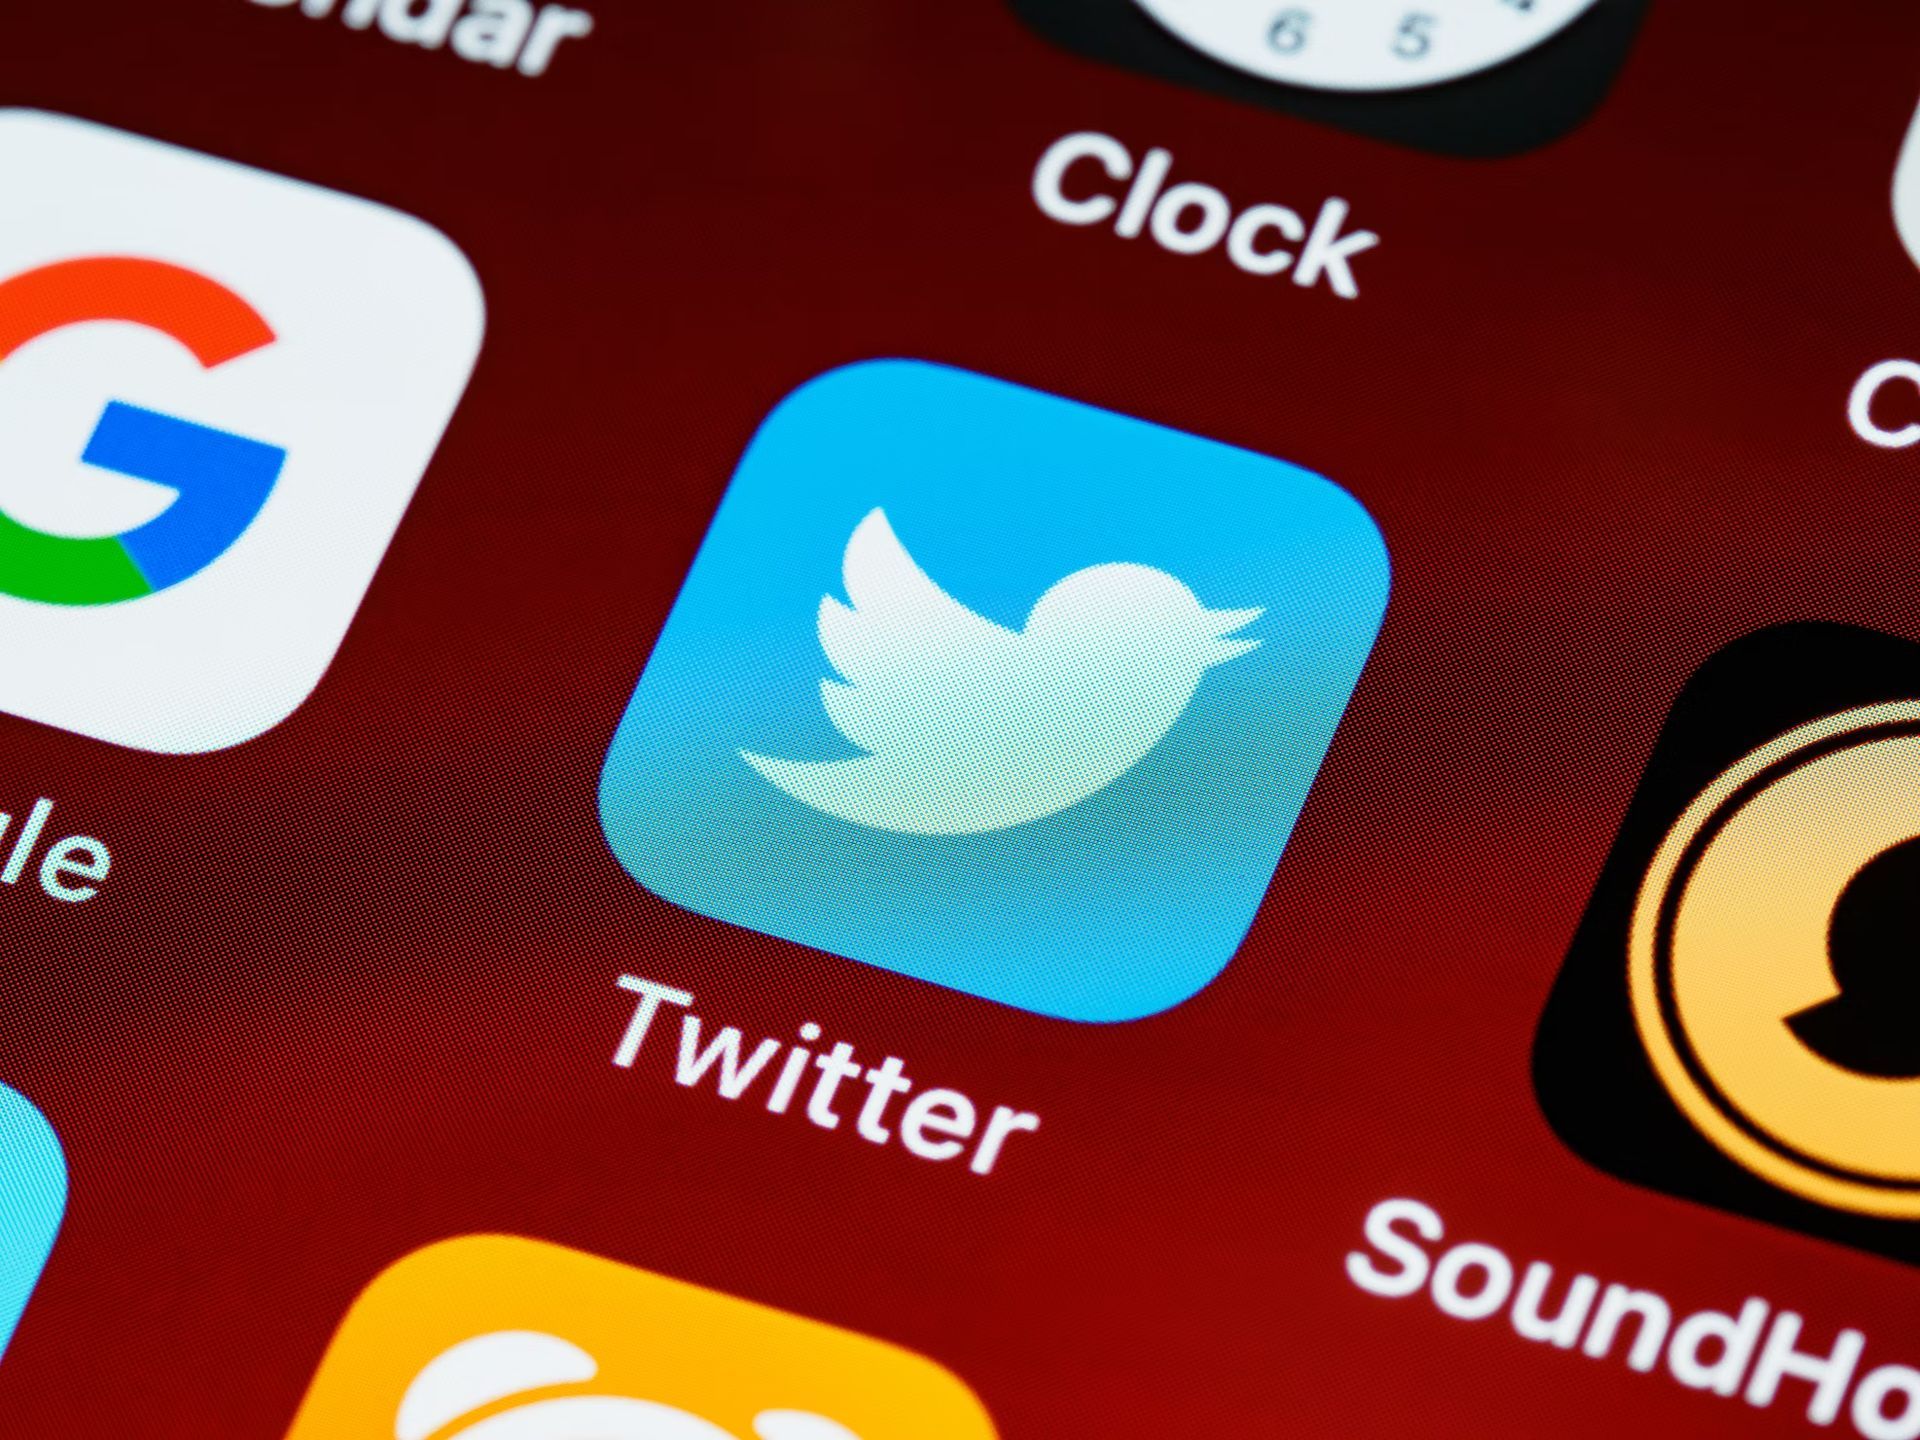 Alleged cybersecurity issues of Twitter is causing a headache for the firm